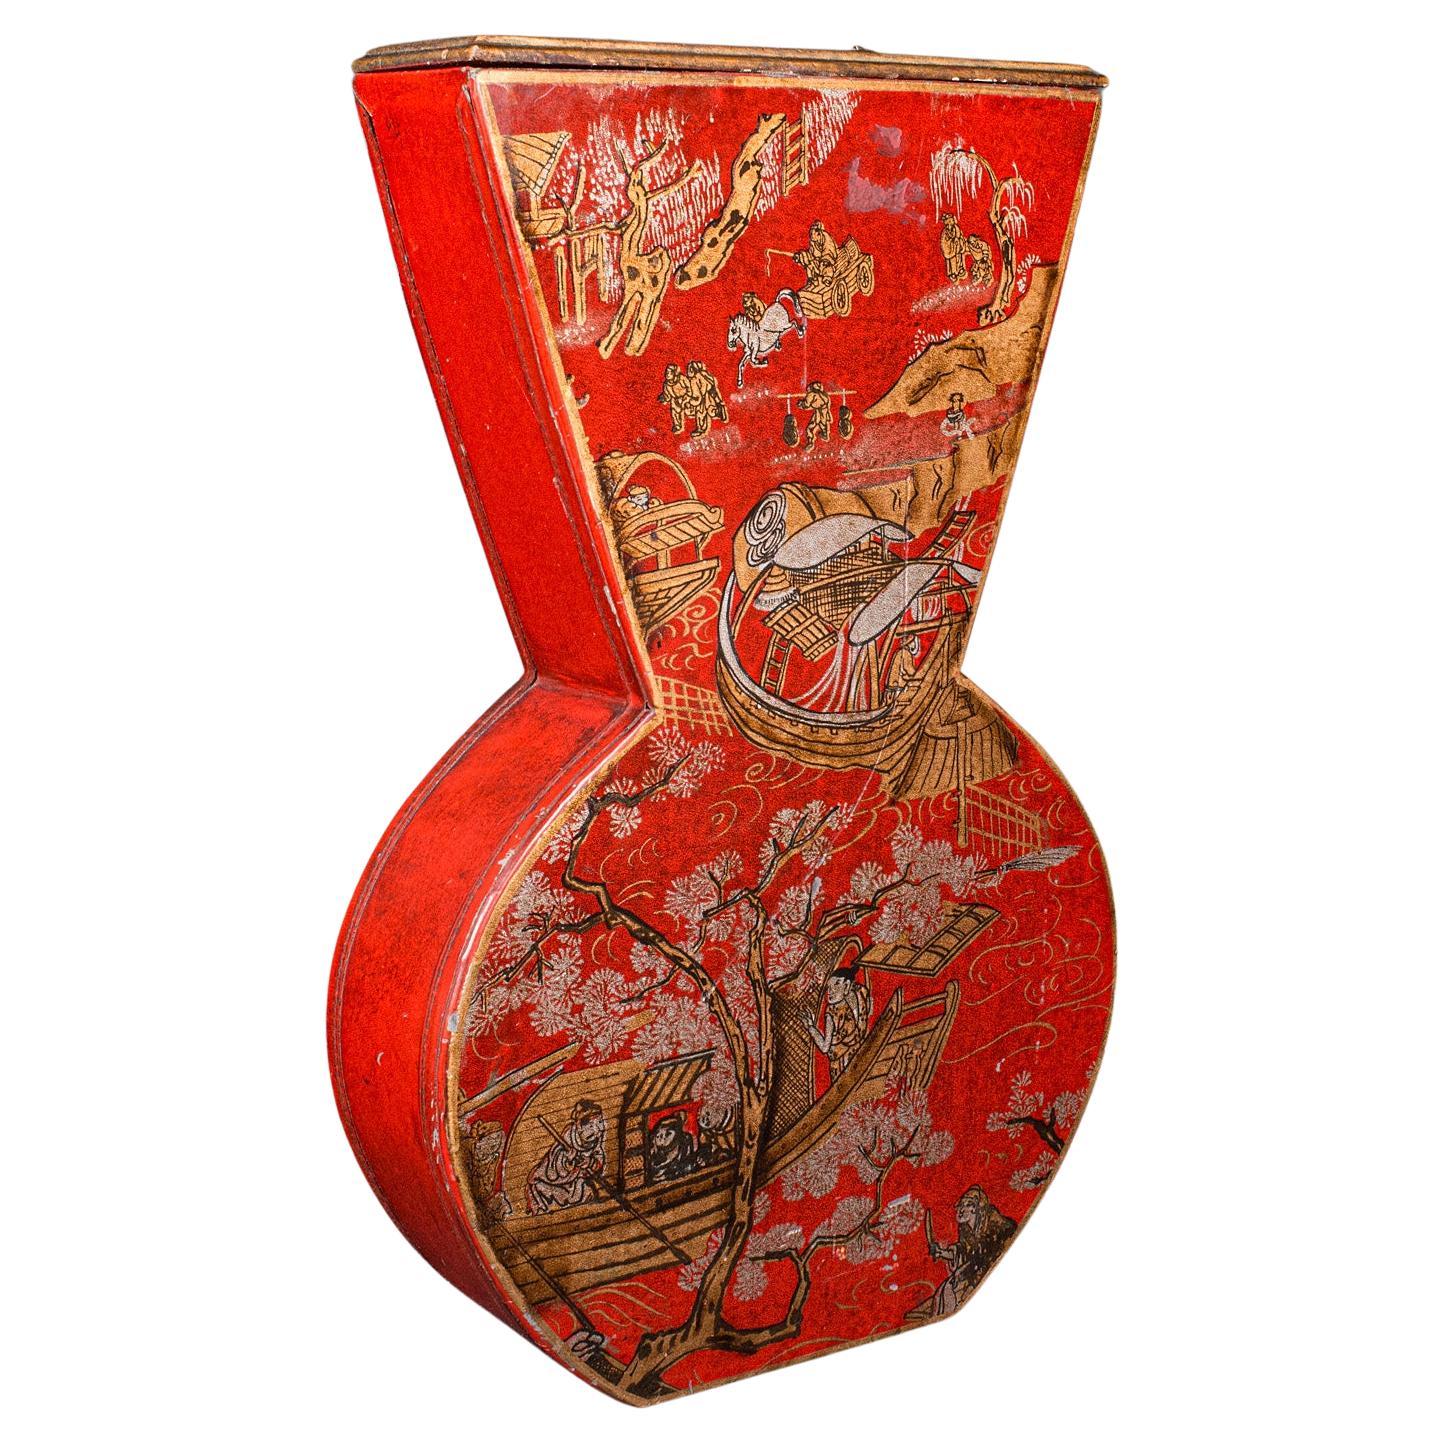 Vintage Dried Flower Vase, Chinese, Handpainted, Decorative, Chinoiserie, C.1970